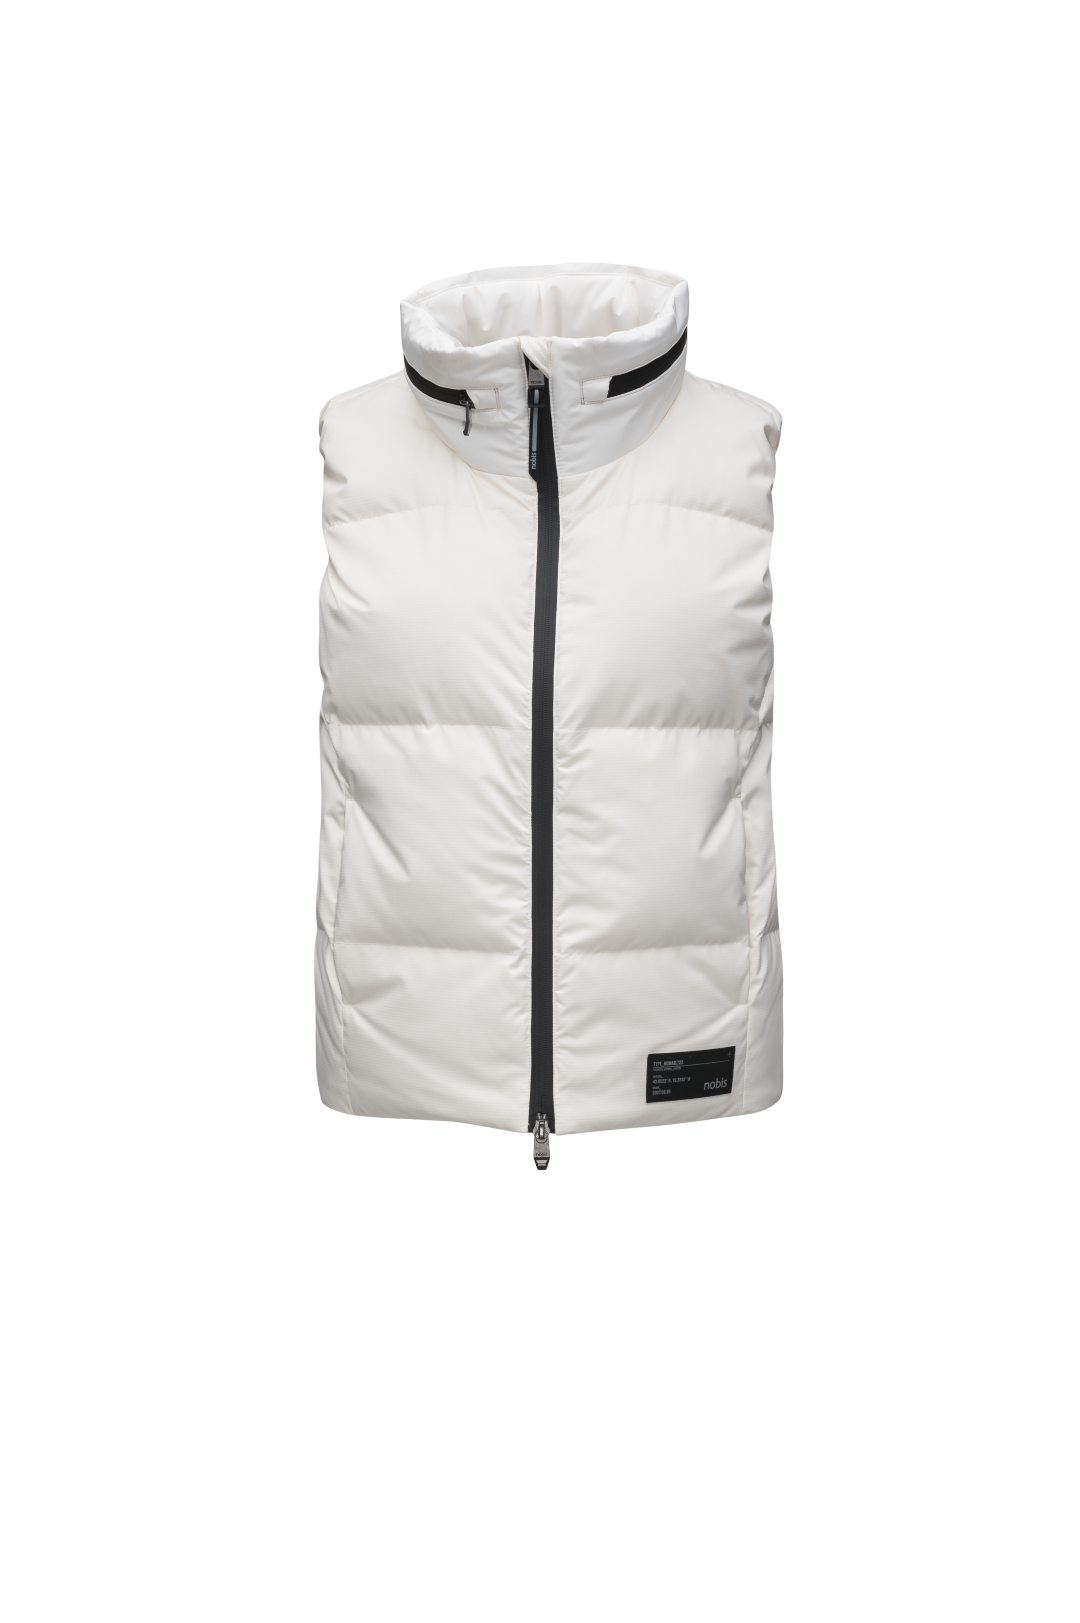 Oren Ladies Performance Vest in hip length, Durable Stretch Ripstop and 3-Ply Micro Denier fabrication, Premium Canadian White Duck Down insulation, tuck-away waterproof hood, and two-way centre front zipper, in Chalk